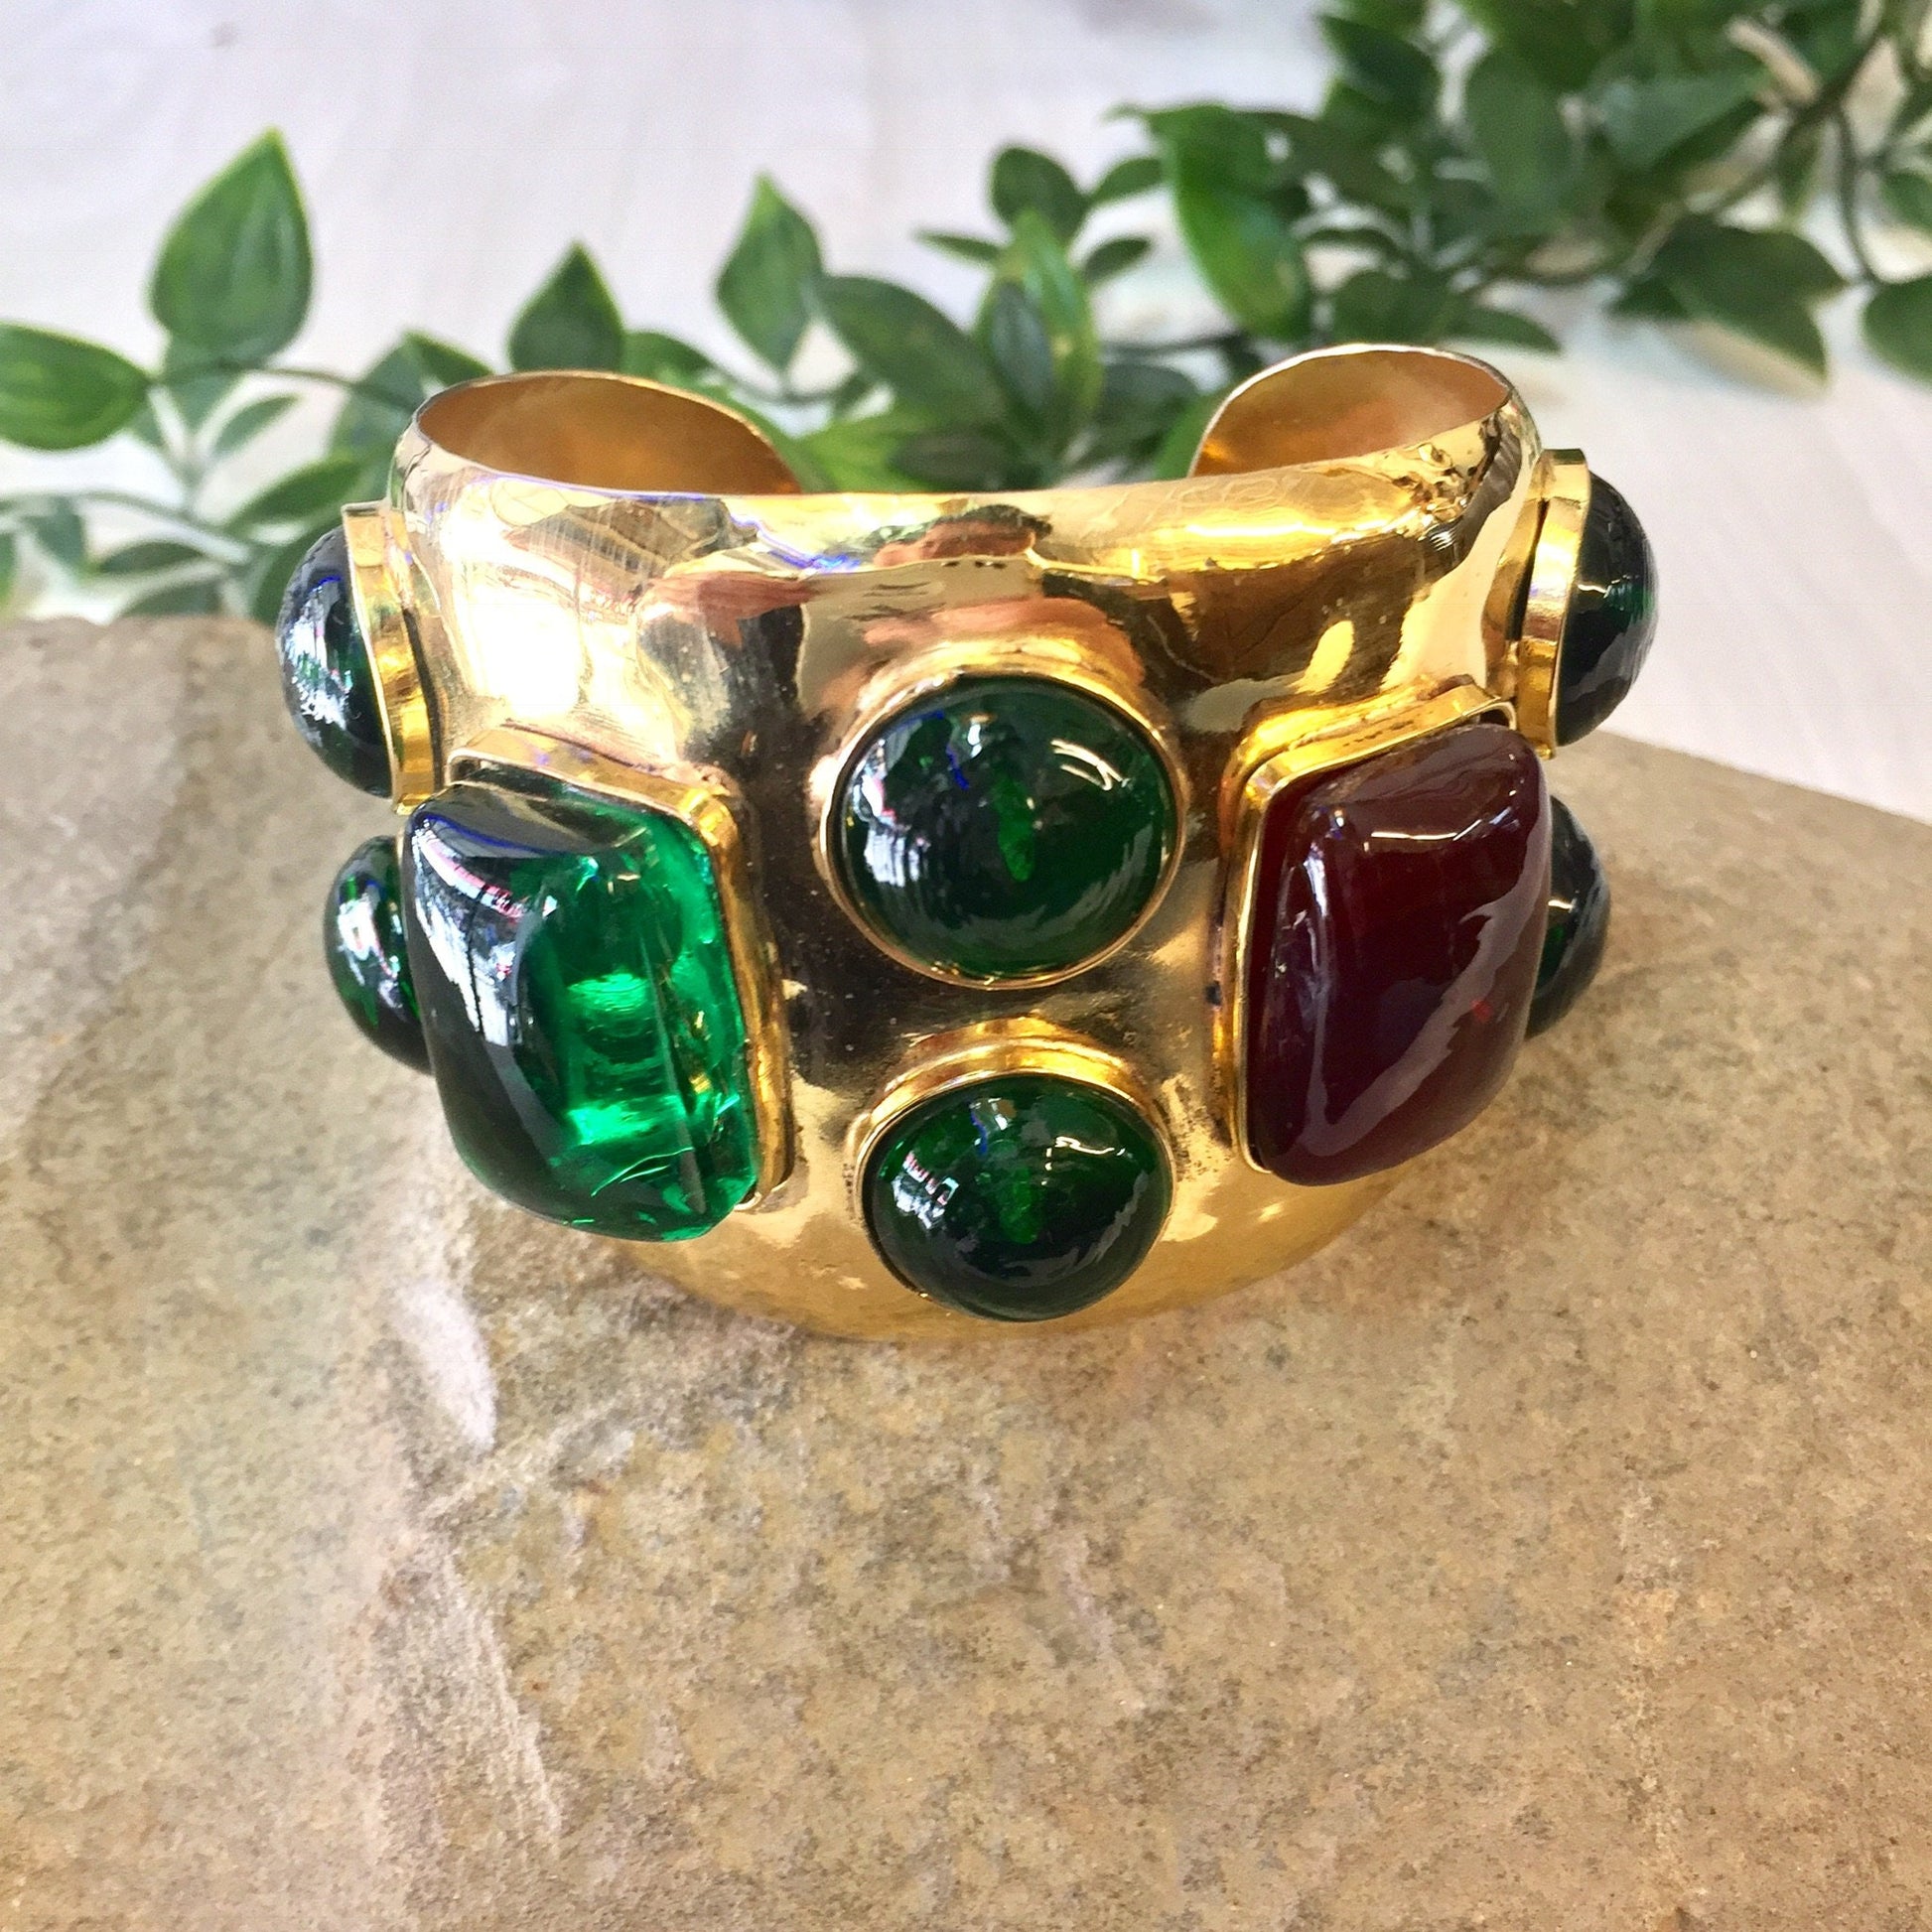 Vintage gold-toned cuff bracelet featuring large green and red glass beads set in ornate metalwork on a textured stone surface with greenery in the background.